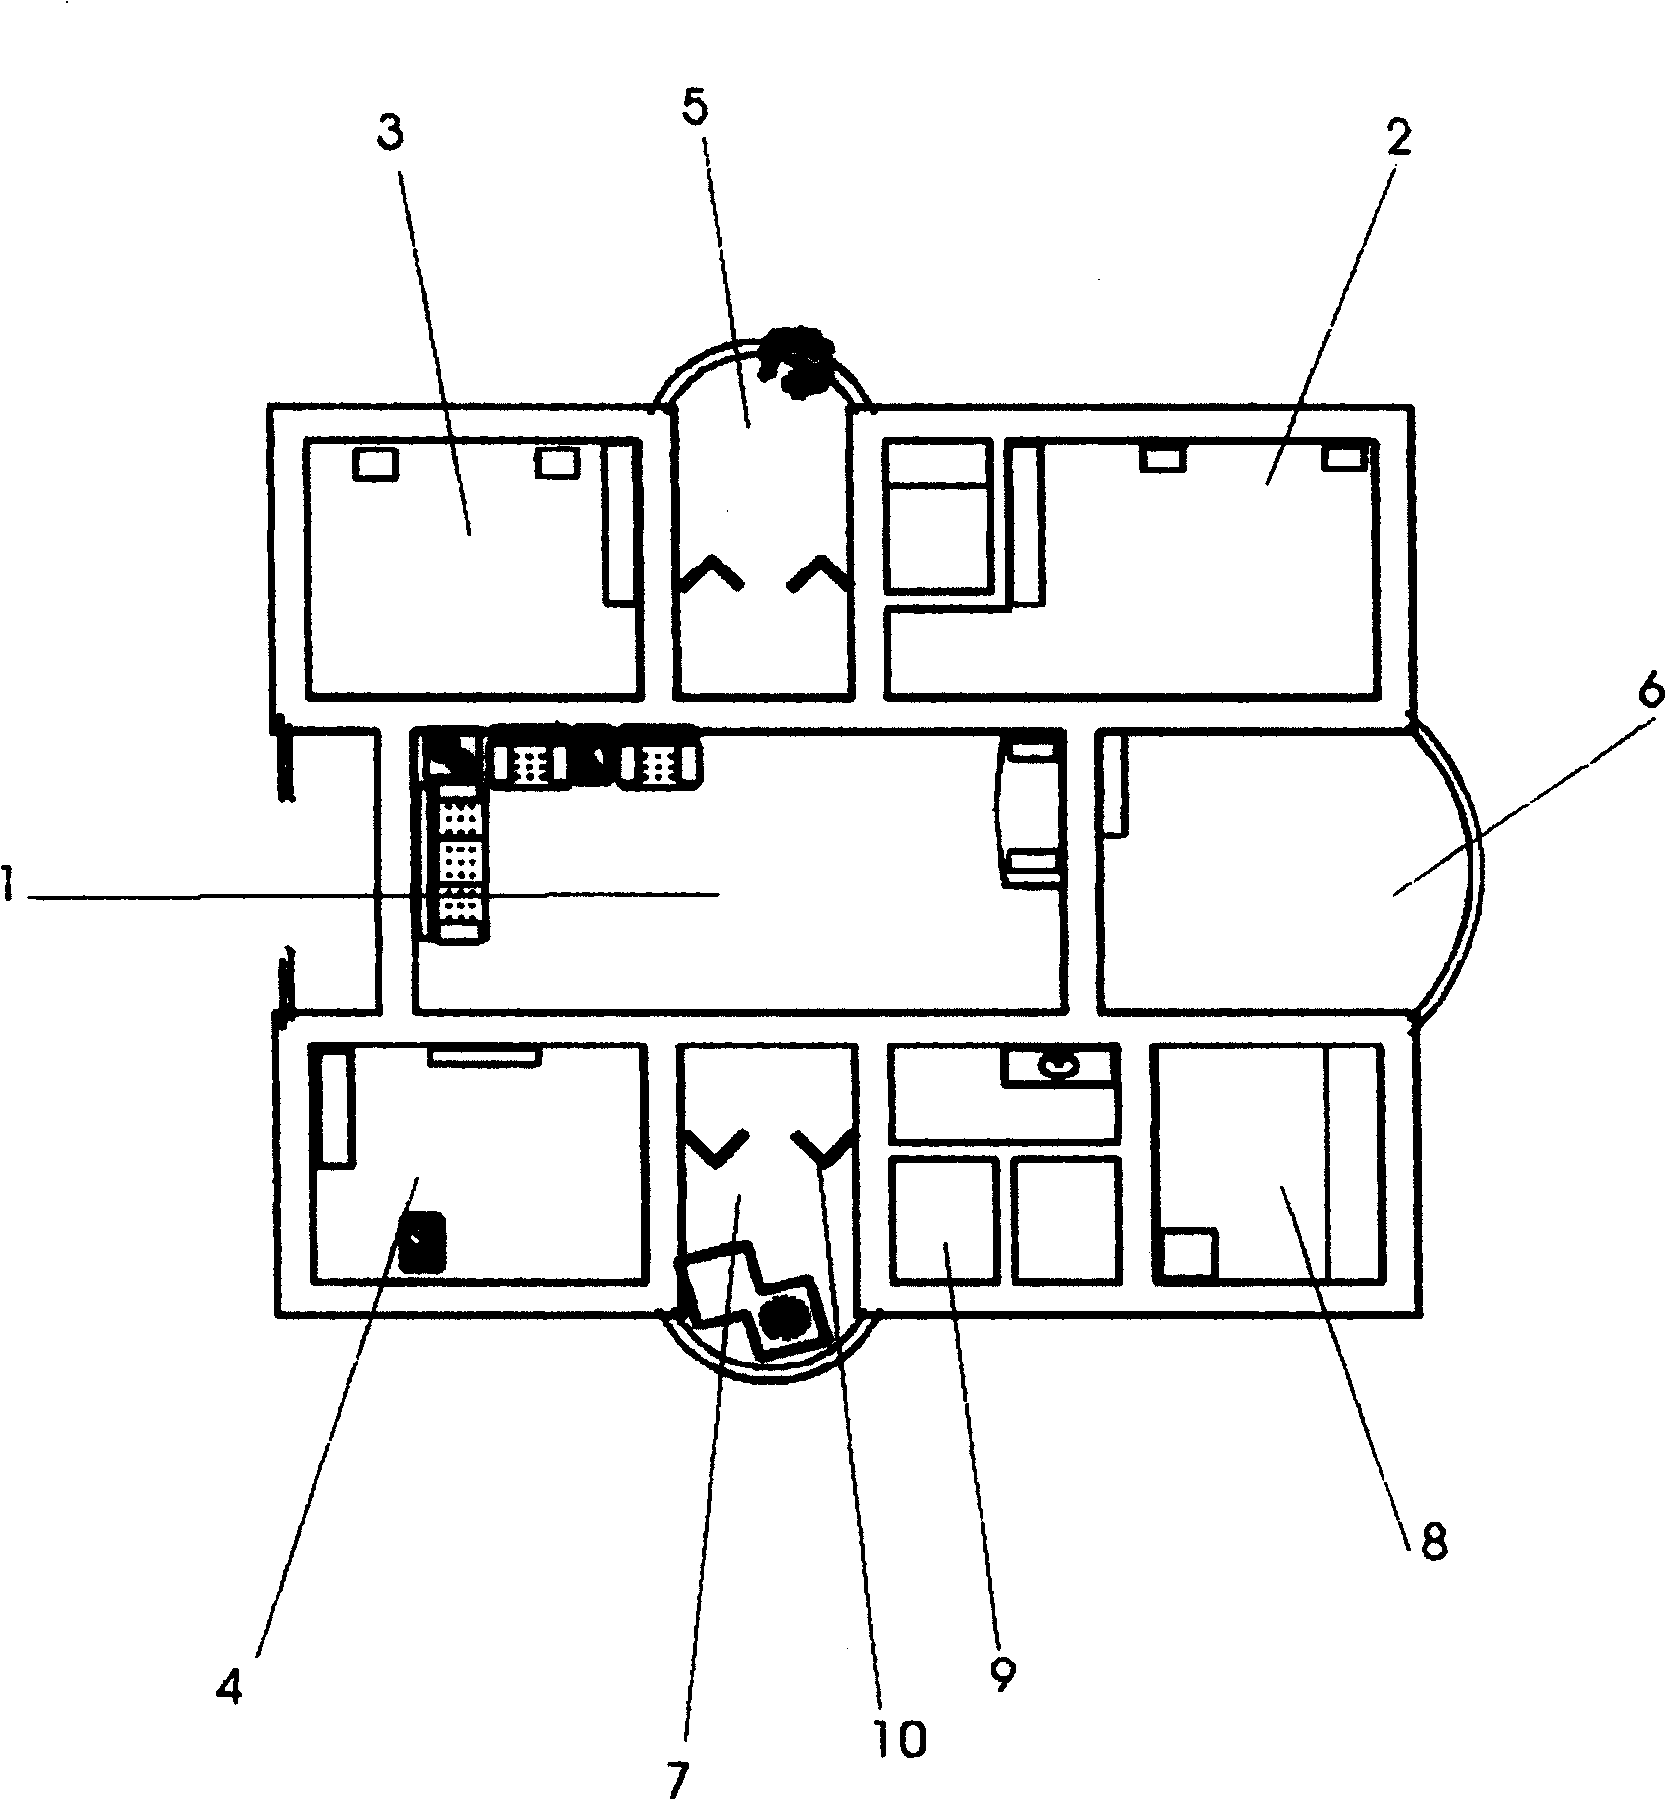 Housing unit structure and its integral layout design